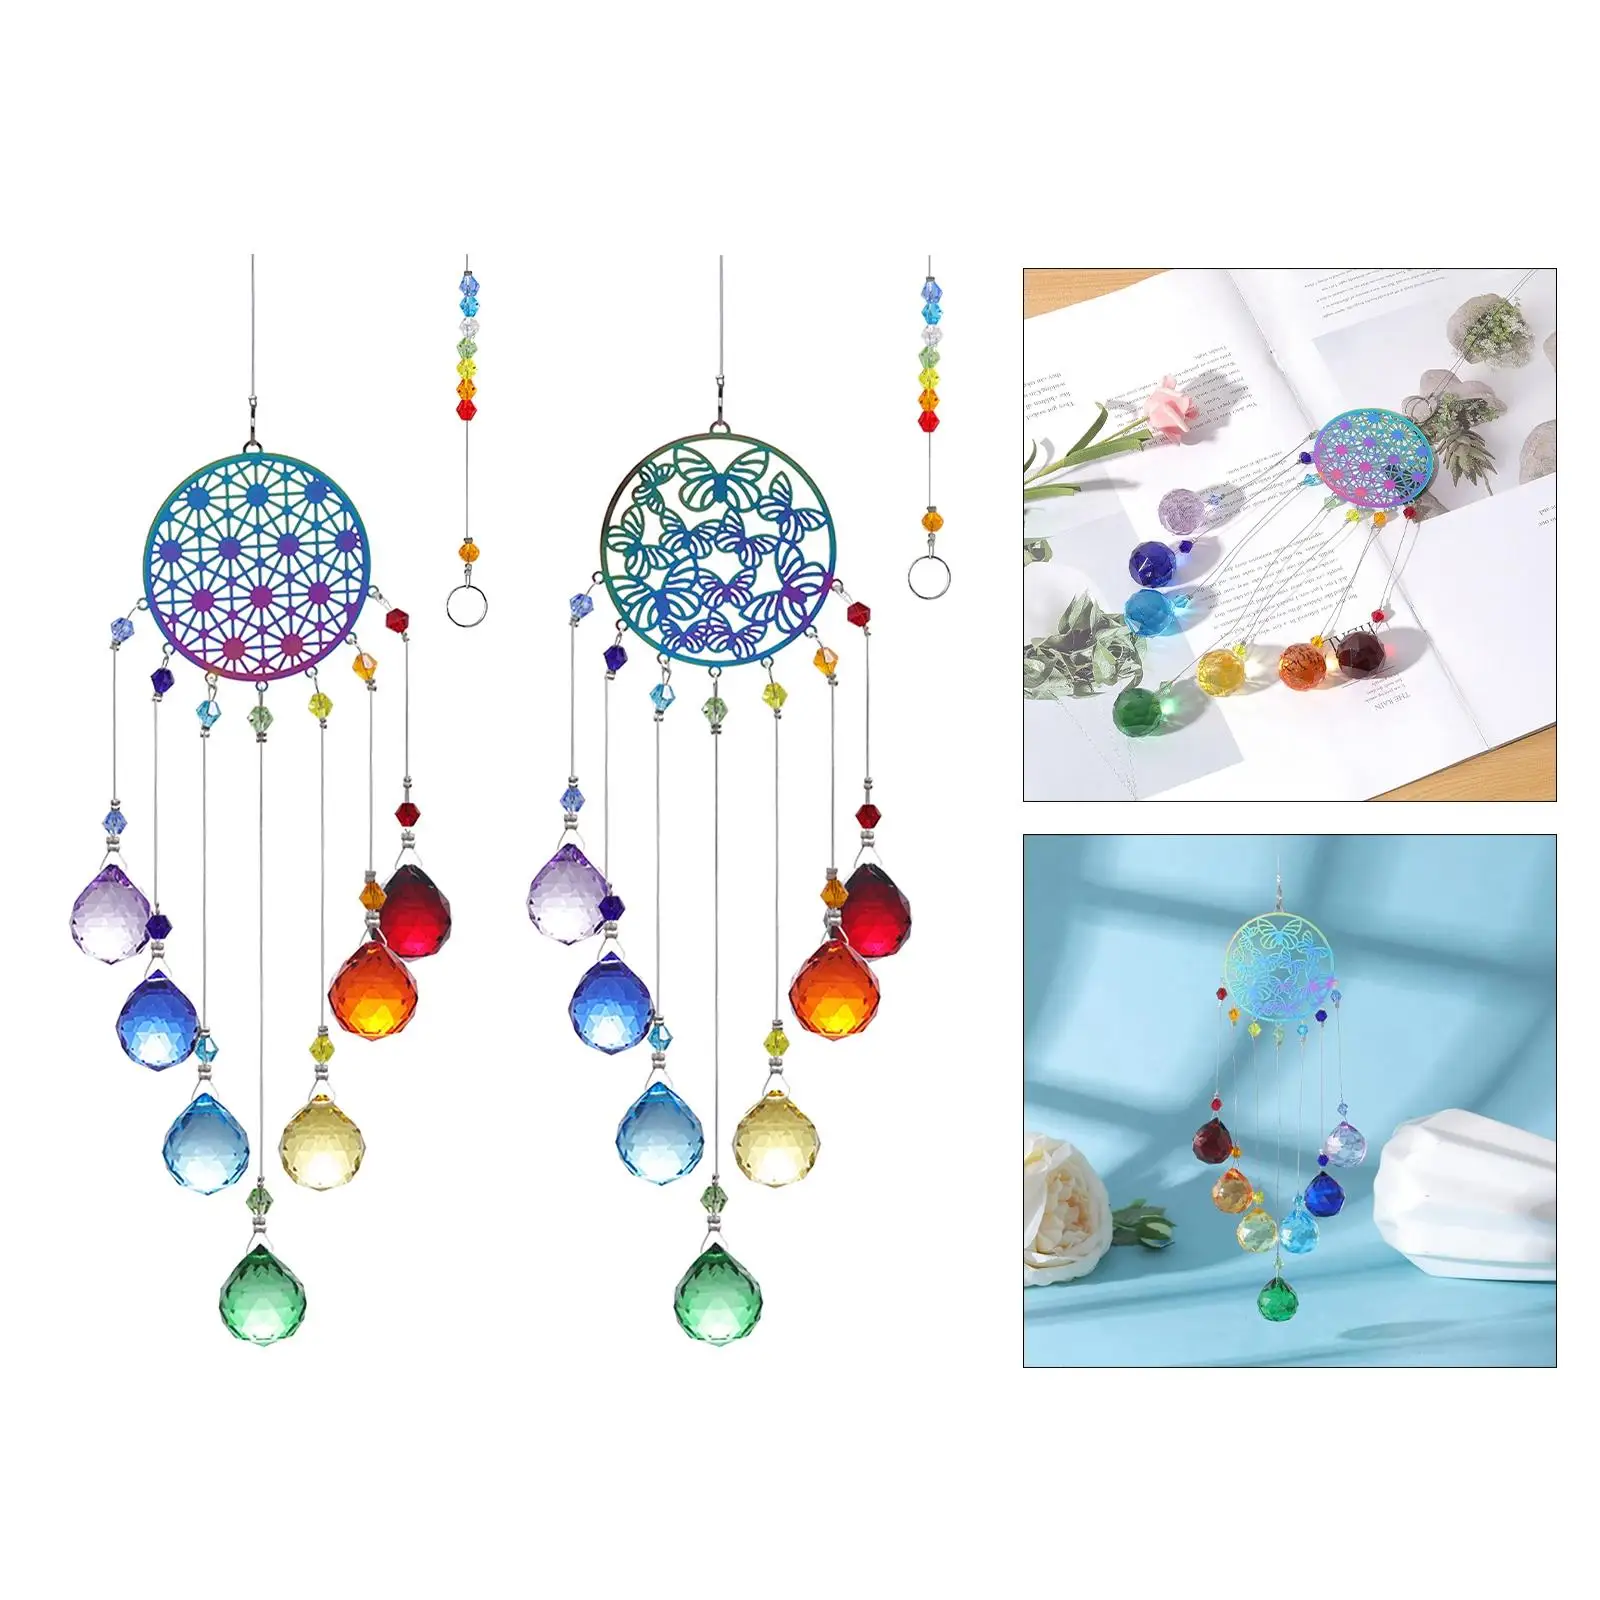 Hanging Crystal Wind Chime Prism 7 Crystal Balls Colorful Wind Bell for Indoor Outdoor Window Backyard Decoration